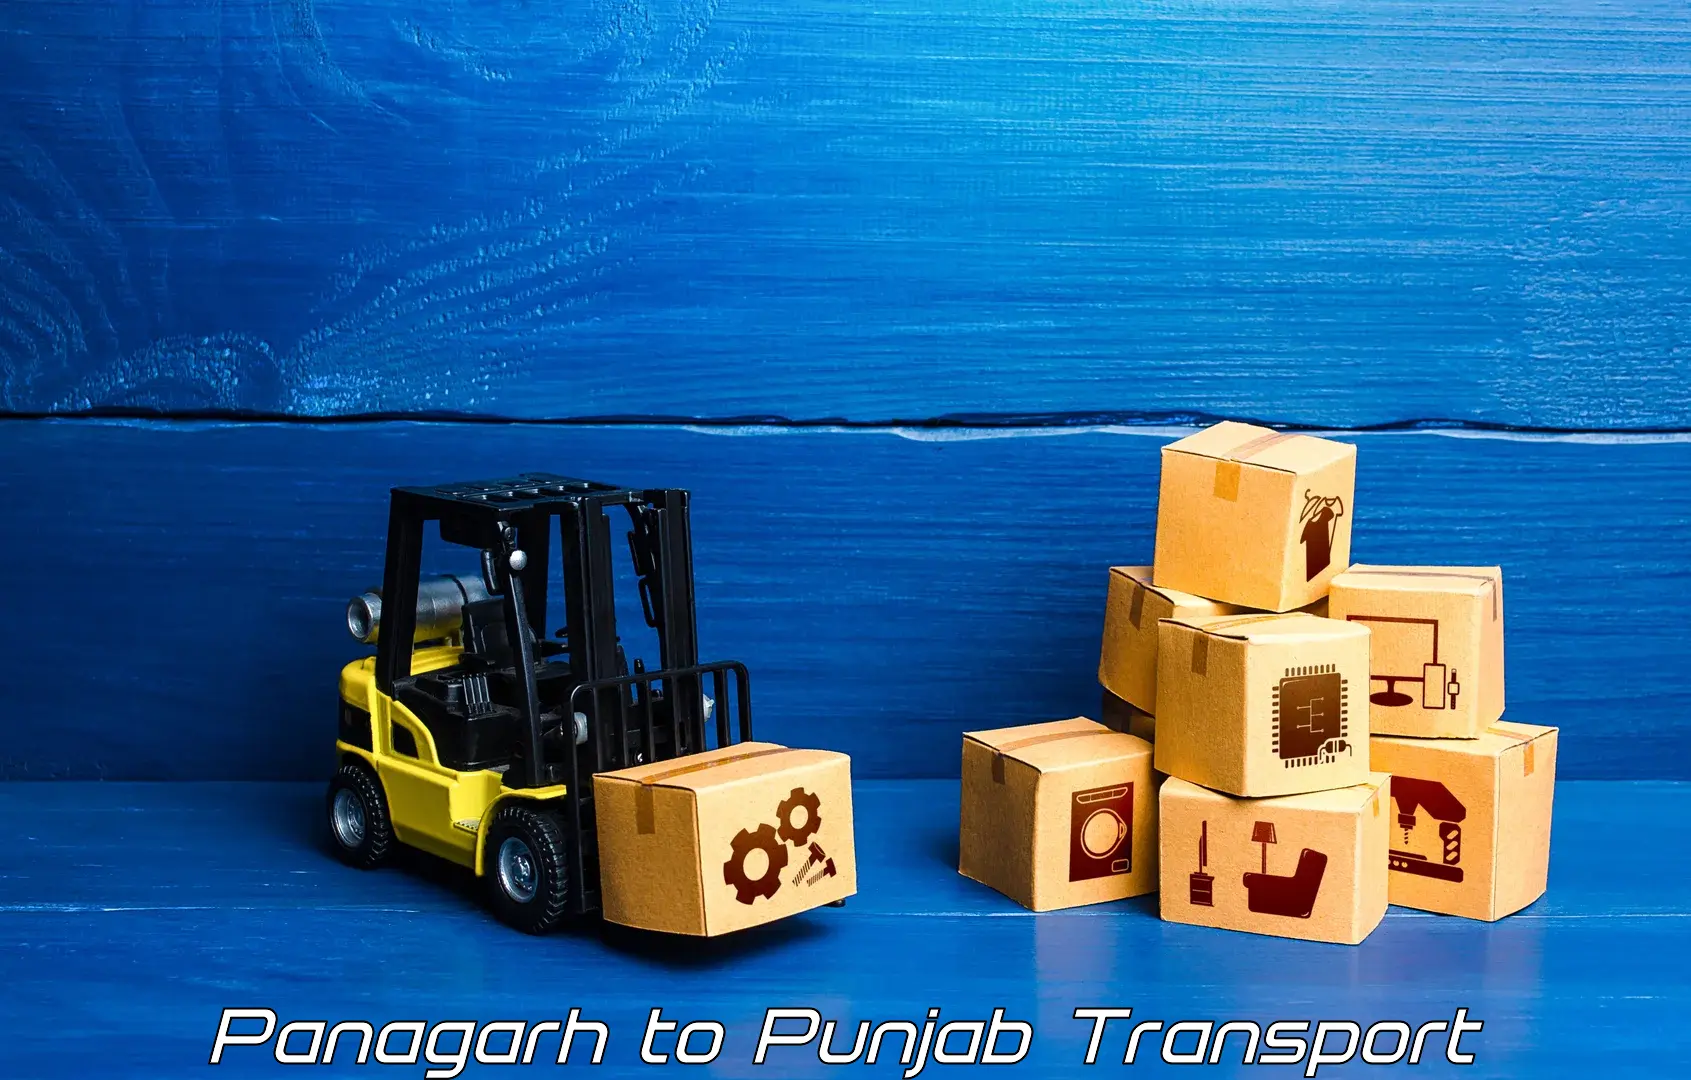 Nationwide transport services Panagarh to Mohali